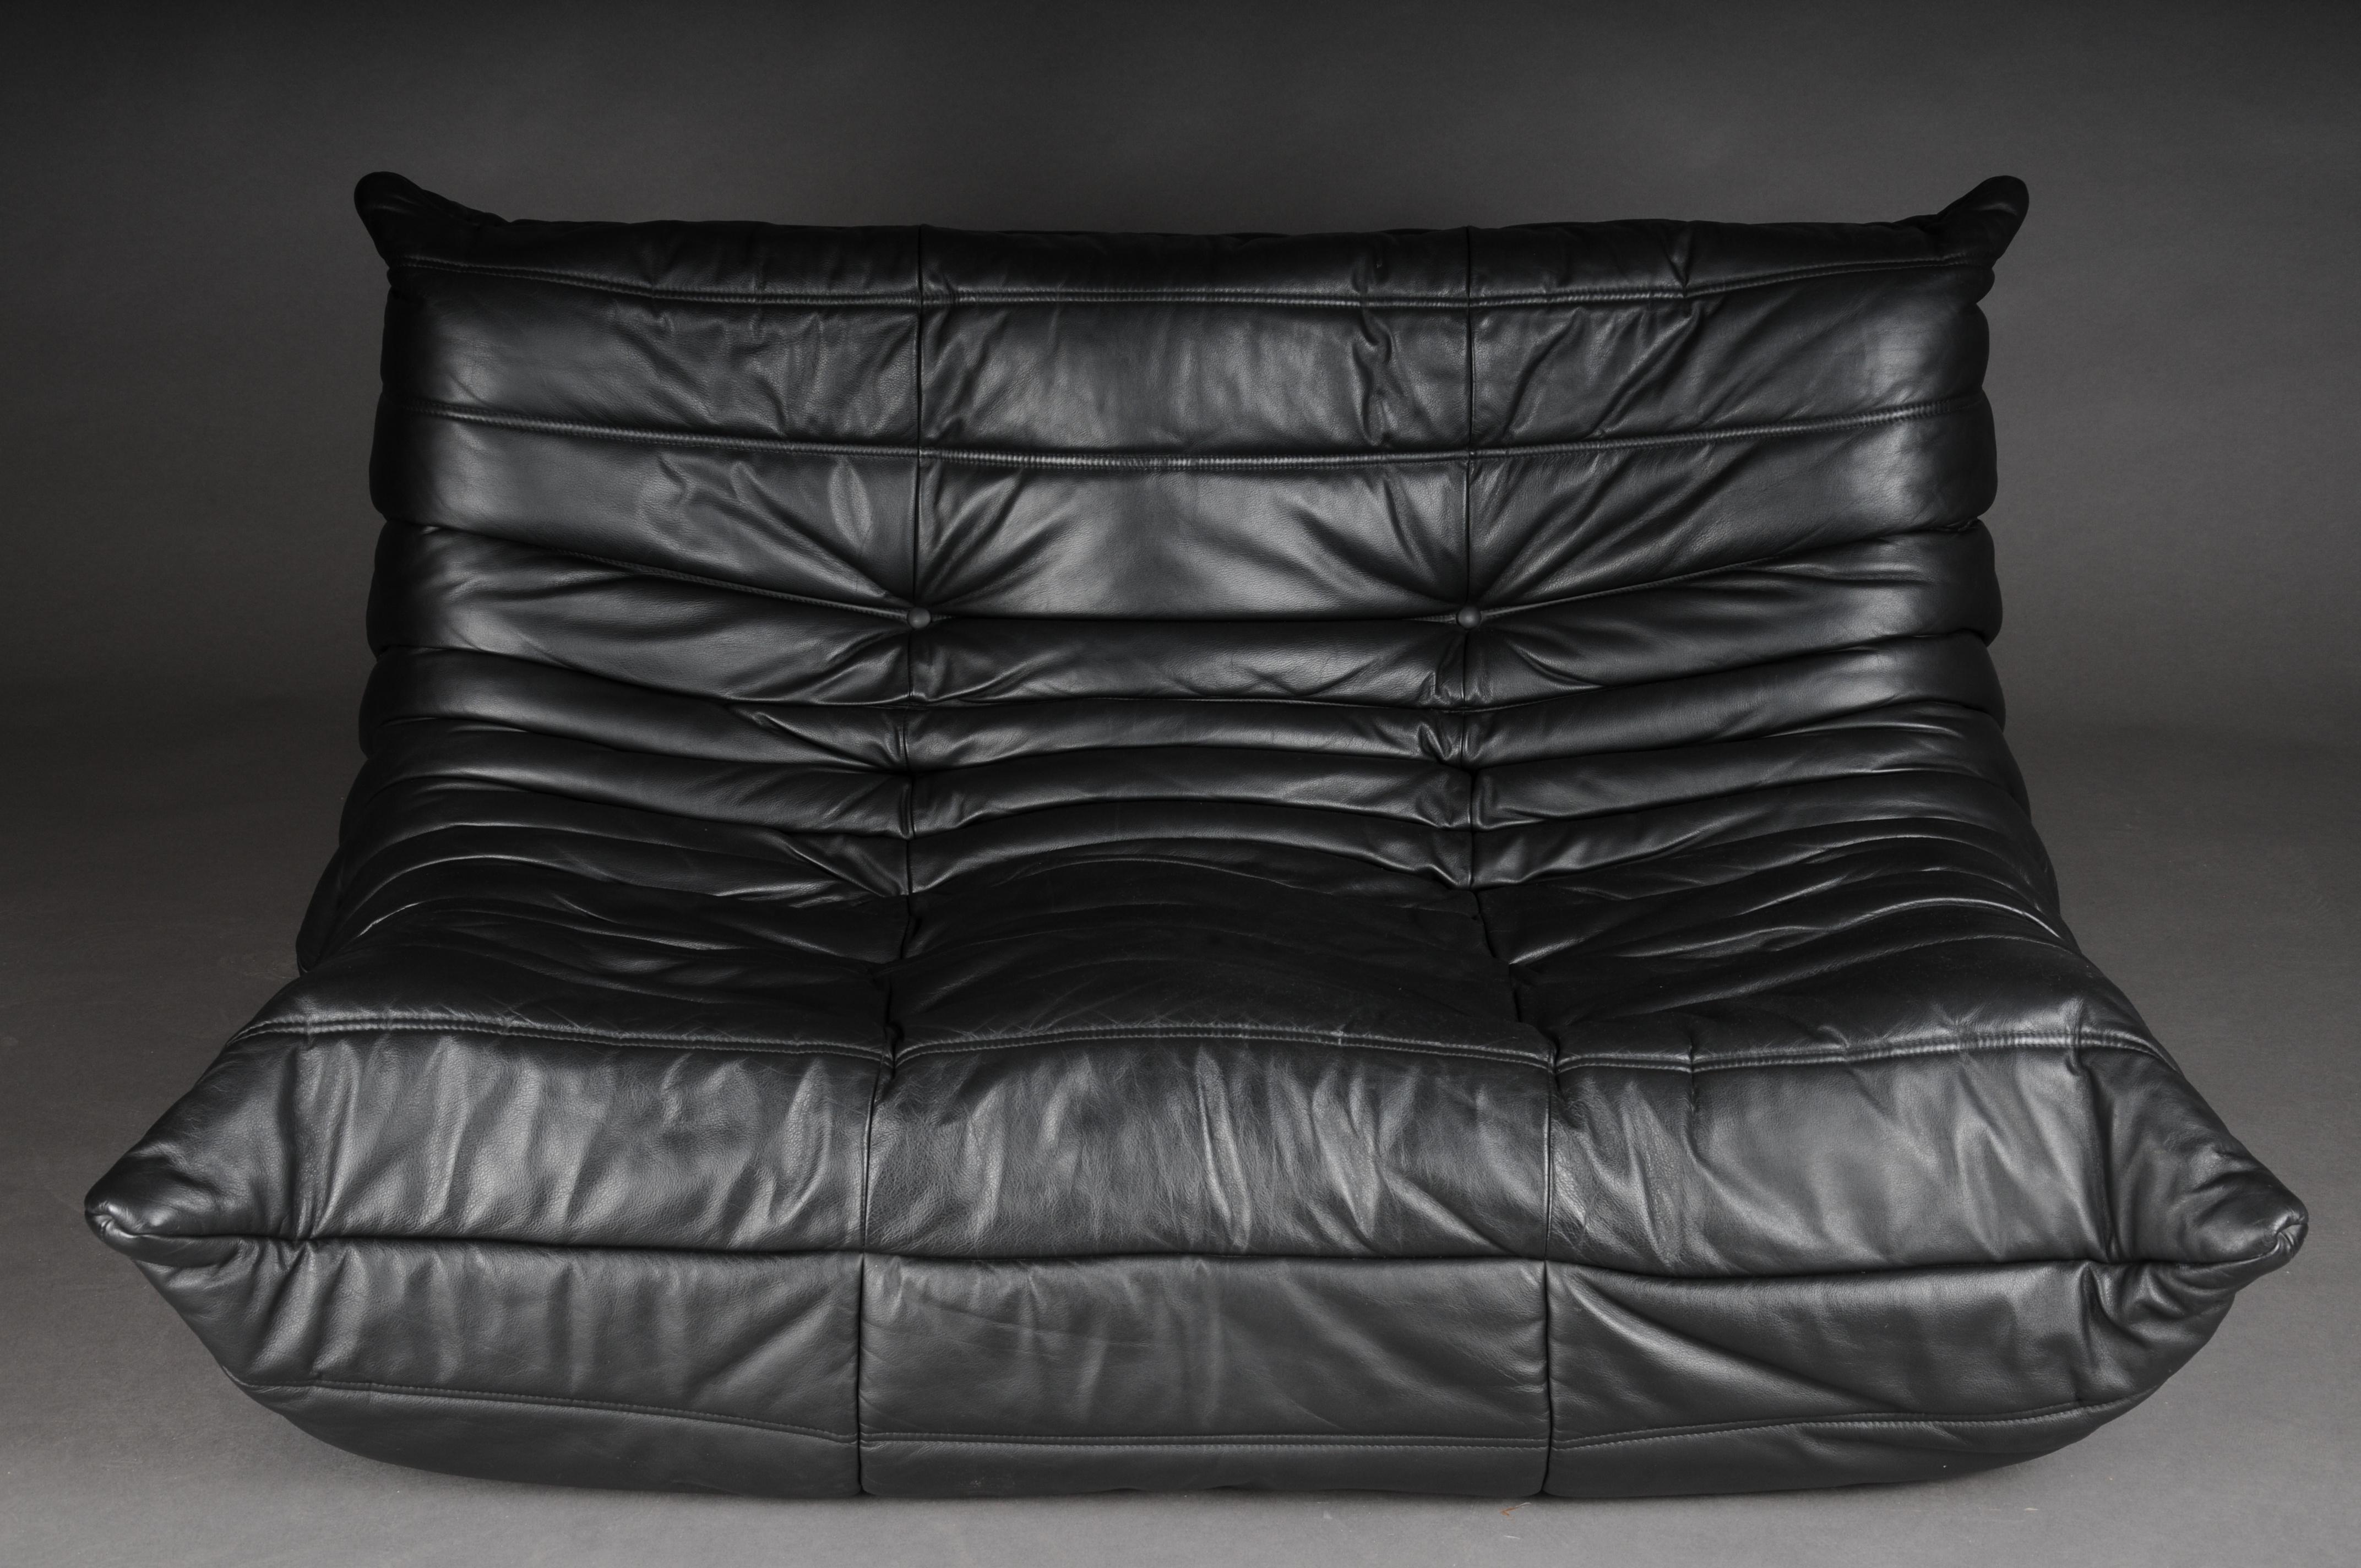 Two seater Togo sofa, black leather by Michel Ducaroy, Ligne Roset, France,

Originally designed in the 1970s, the iconic Togo sofa is now a design classic. This stunning jet black leather sofa still has the original tags and fabric lining